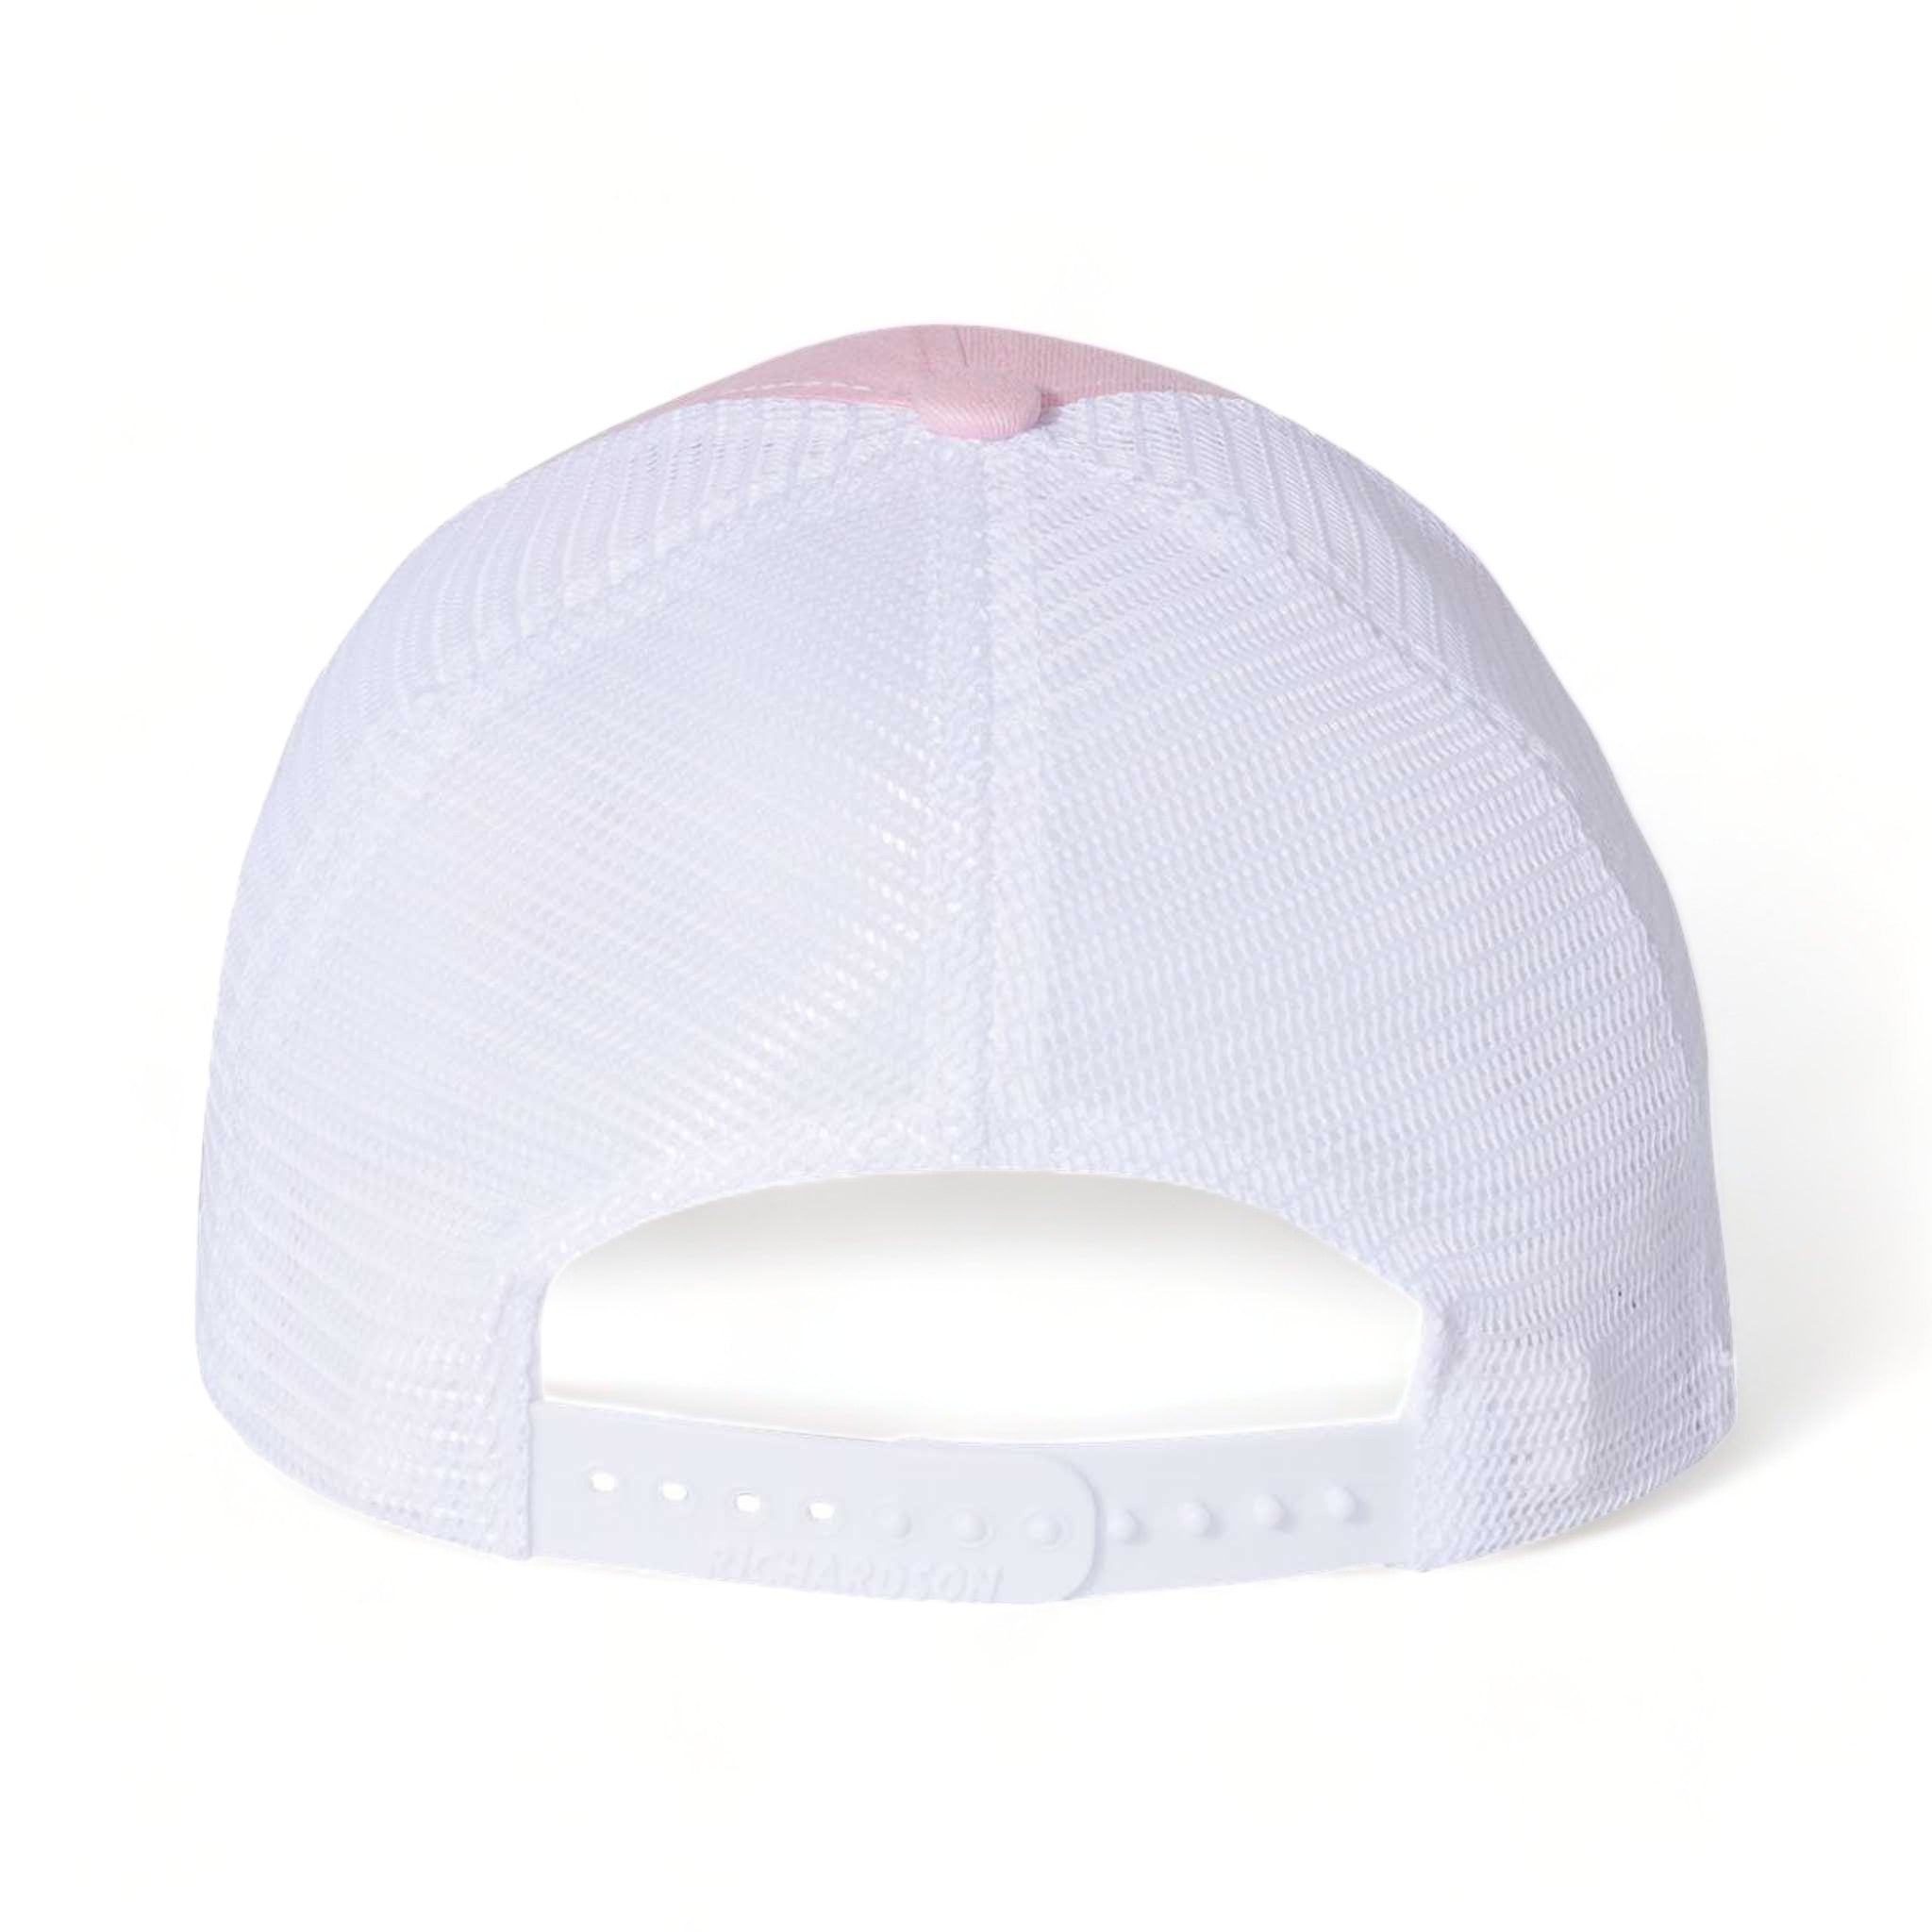 Back view of Richardson 111 custom hat in pink and white